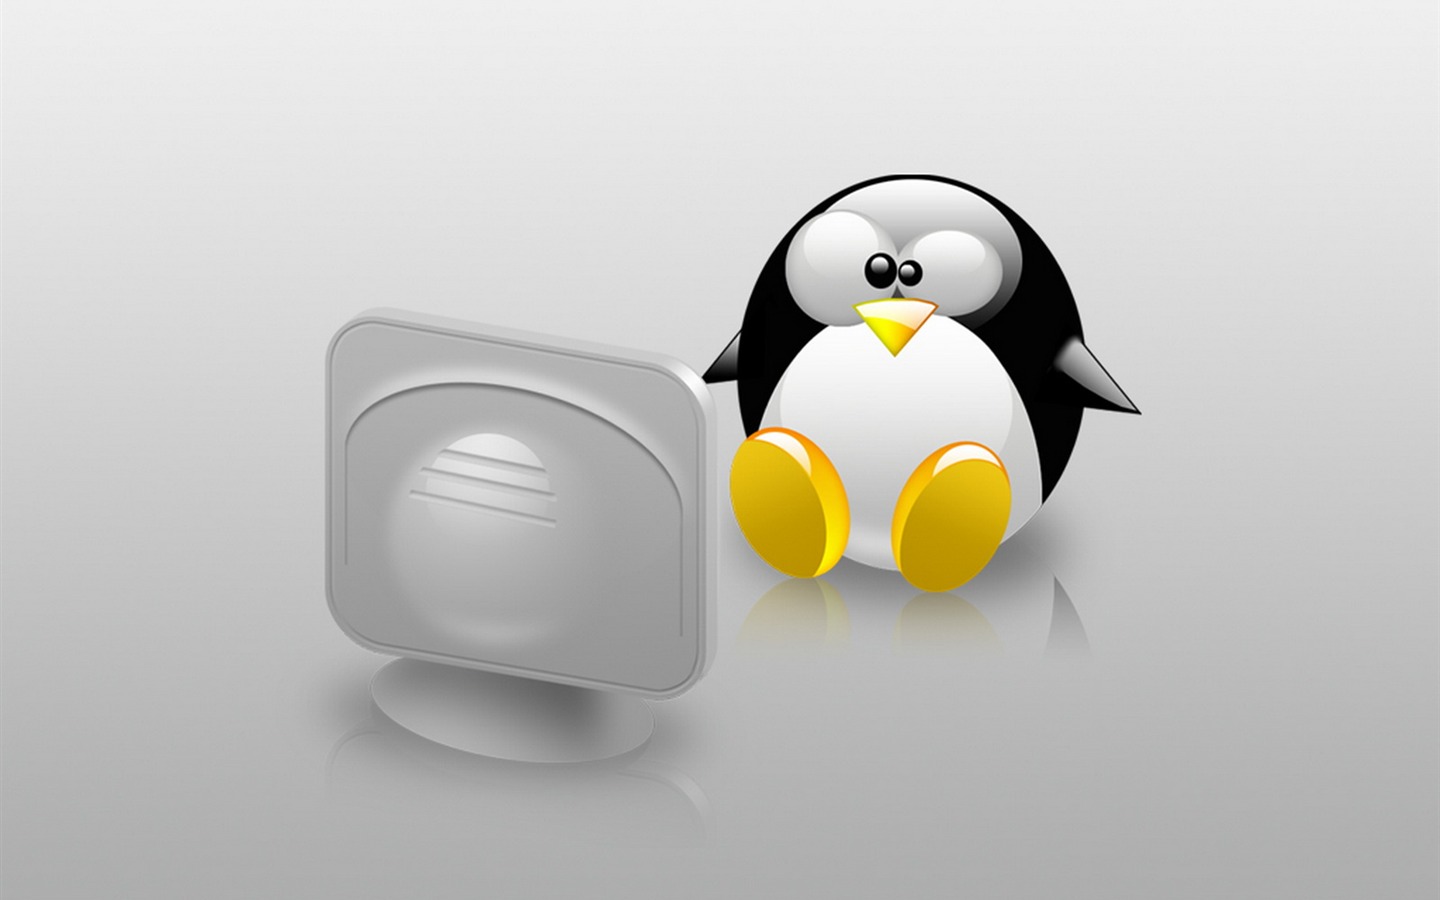 Linux tapety (3) #13 - 1440x900